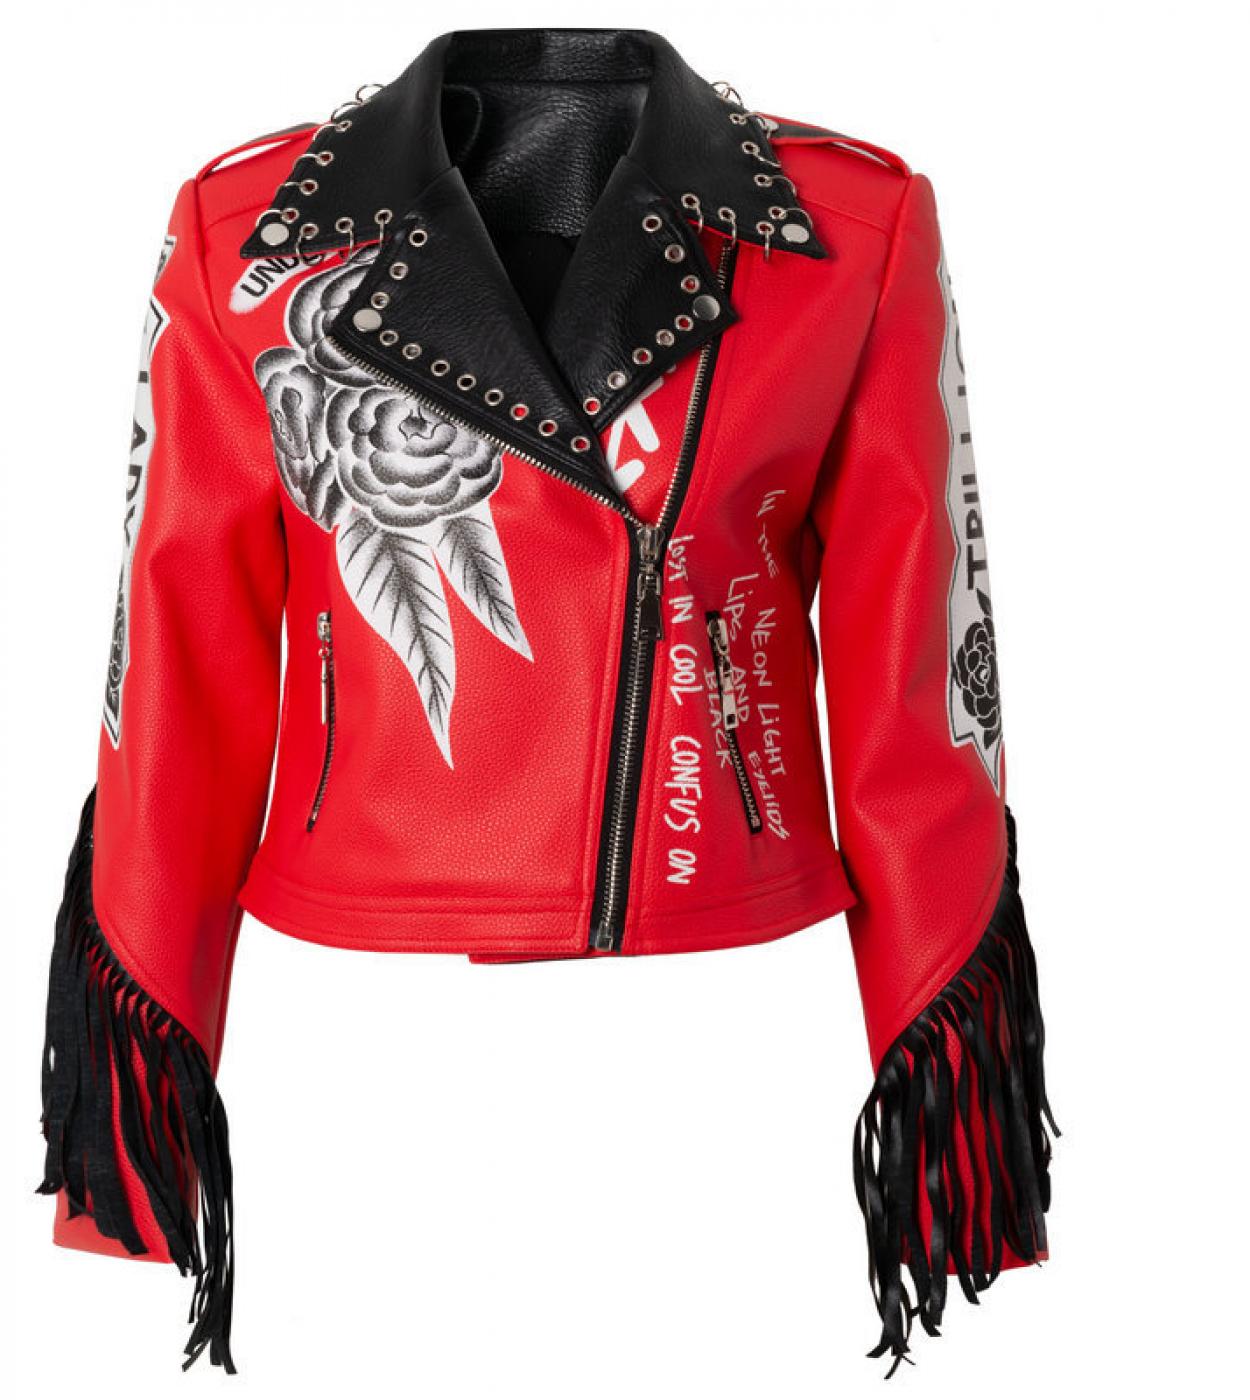 Women Spring Flower Pattern Red Pu Leather Jacket With Ring And Tassels Rivet Motorcycle Coats And Jackets Dj Club Jacke